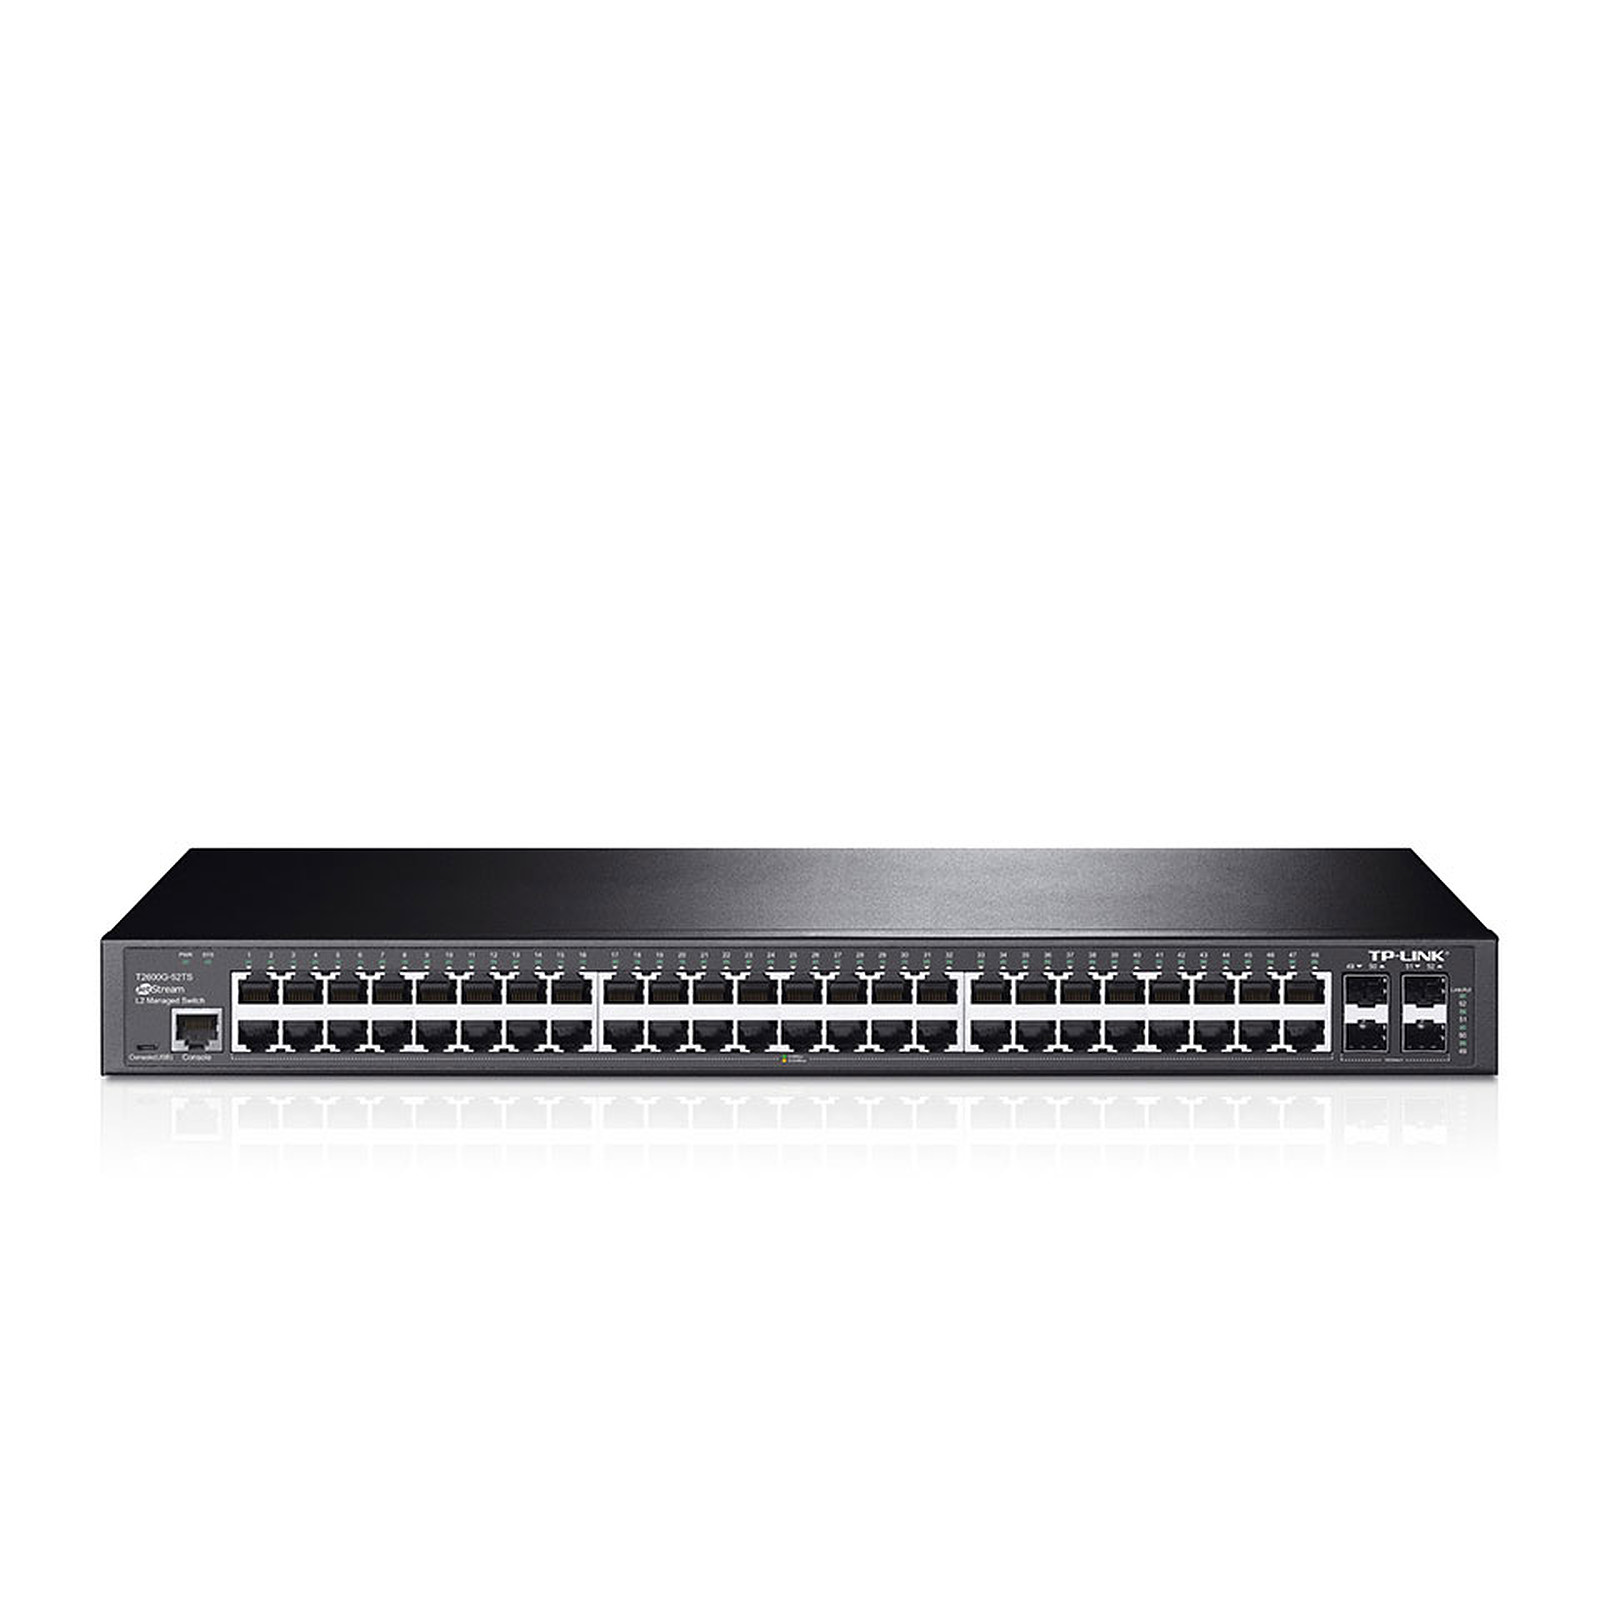 TP-LINK JetStream T2600G-52TS (TL-SG3452) - Switch TP-LINK